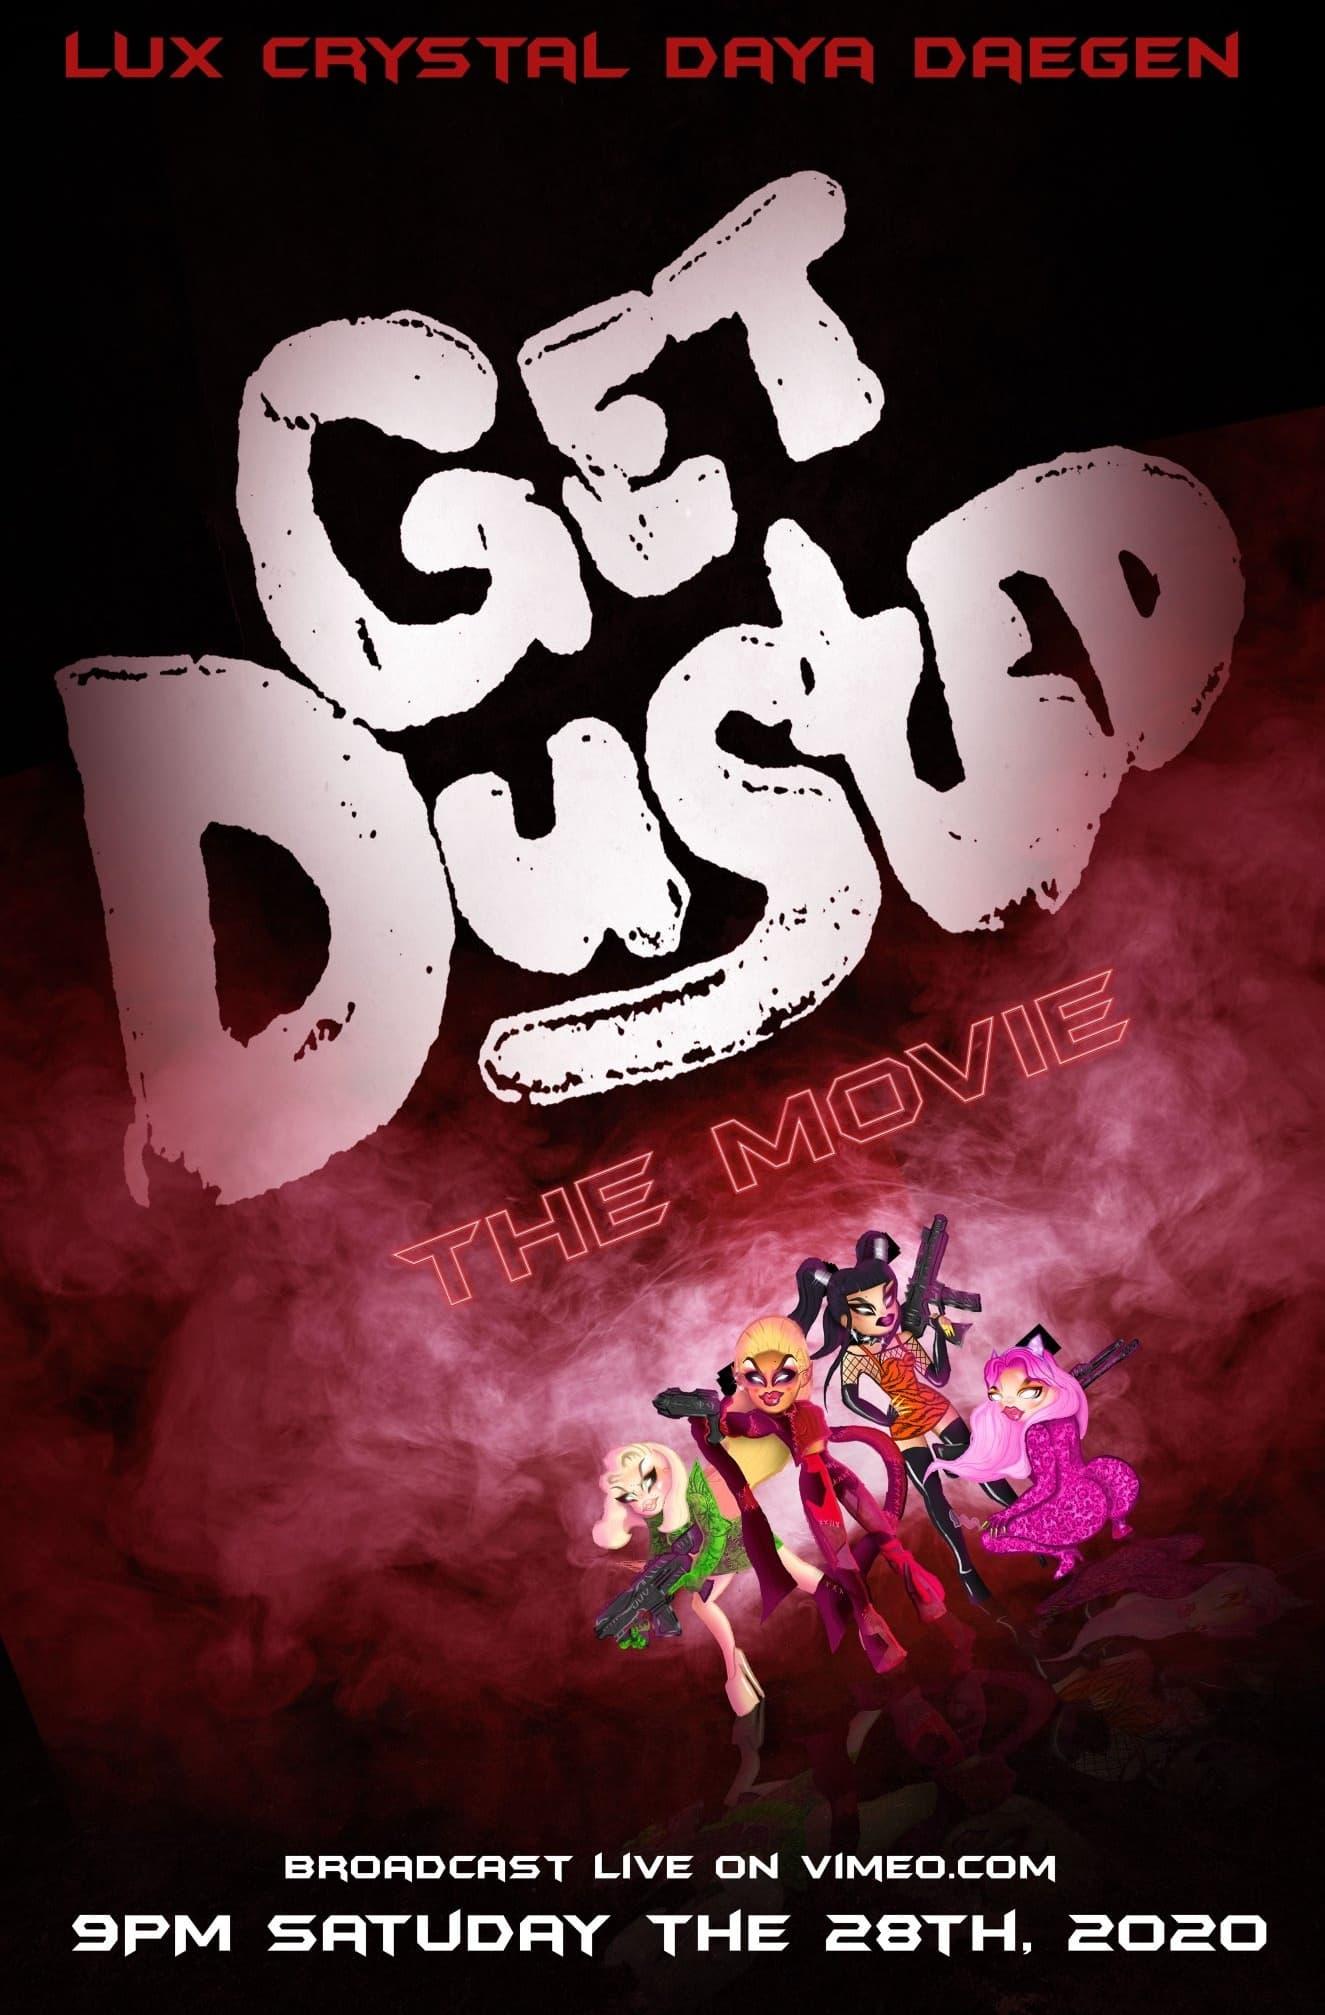 Get Dusted the Movie poster